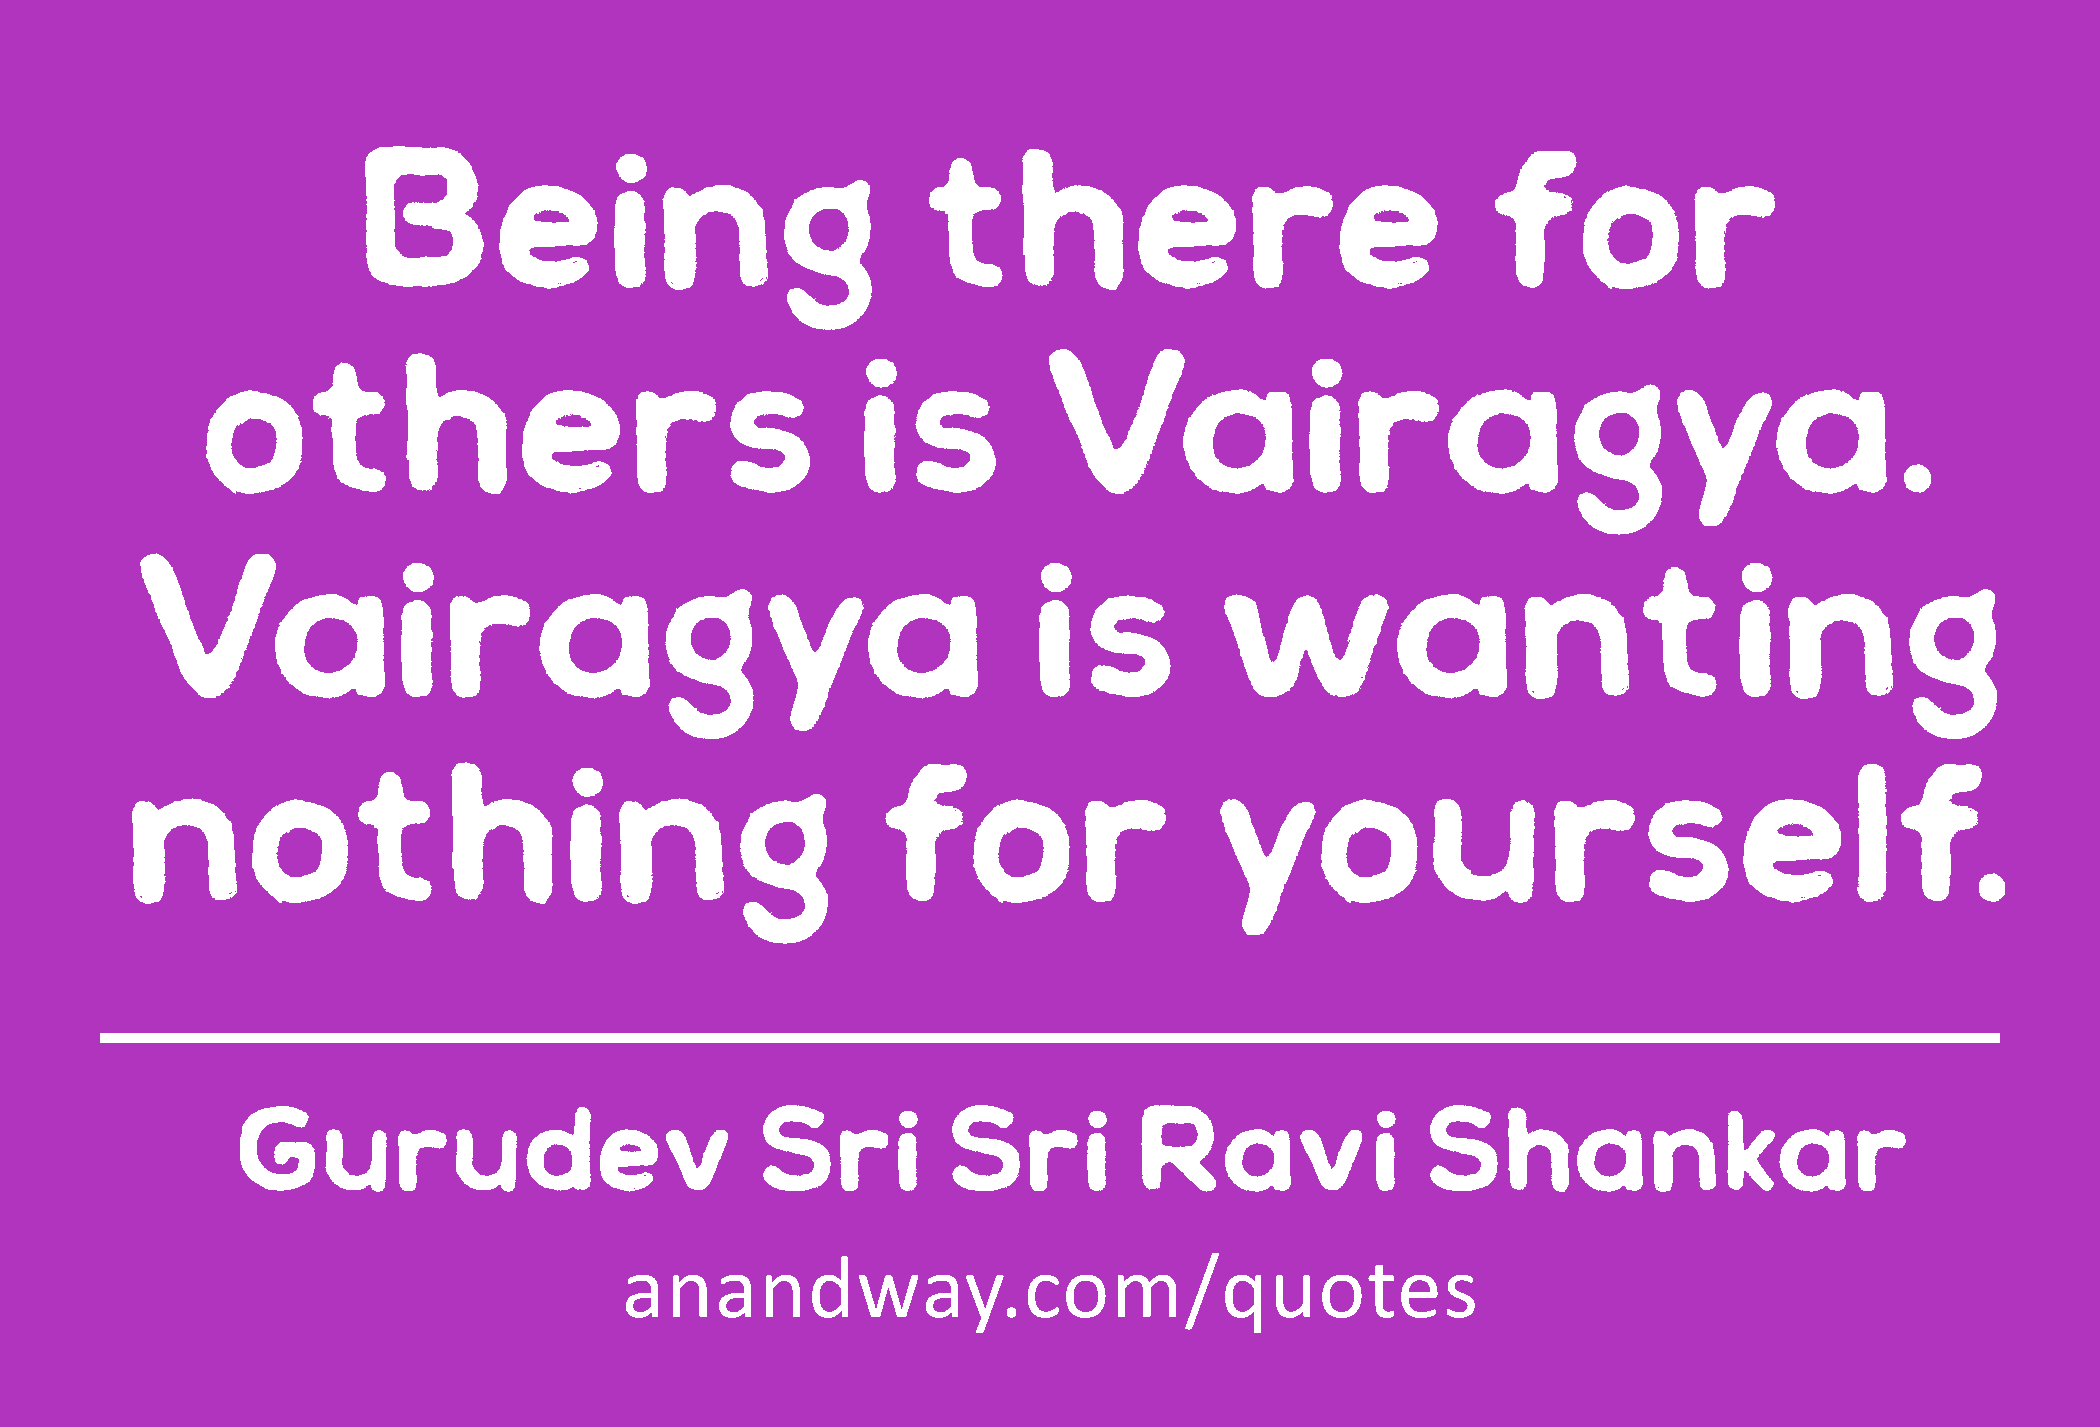 Being there for others is Vairagya. Vairagya is wanting nothing for yourself. 
 -Gurudev Sri Sri Ravi Shankar